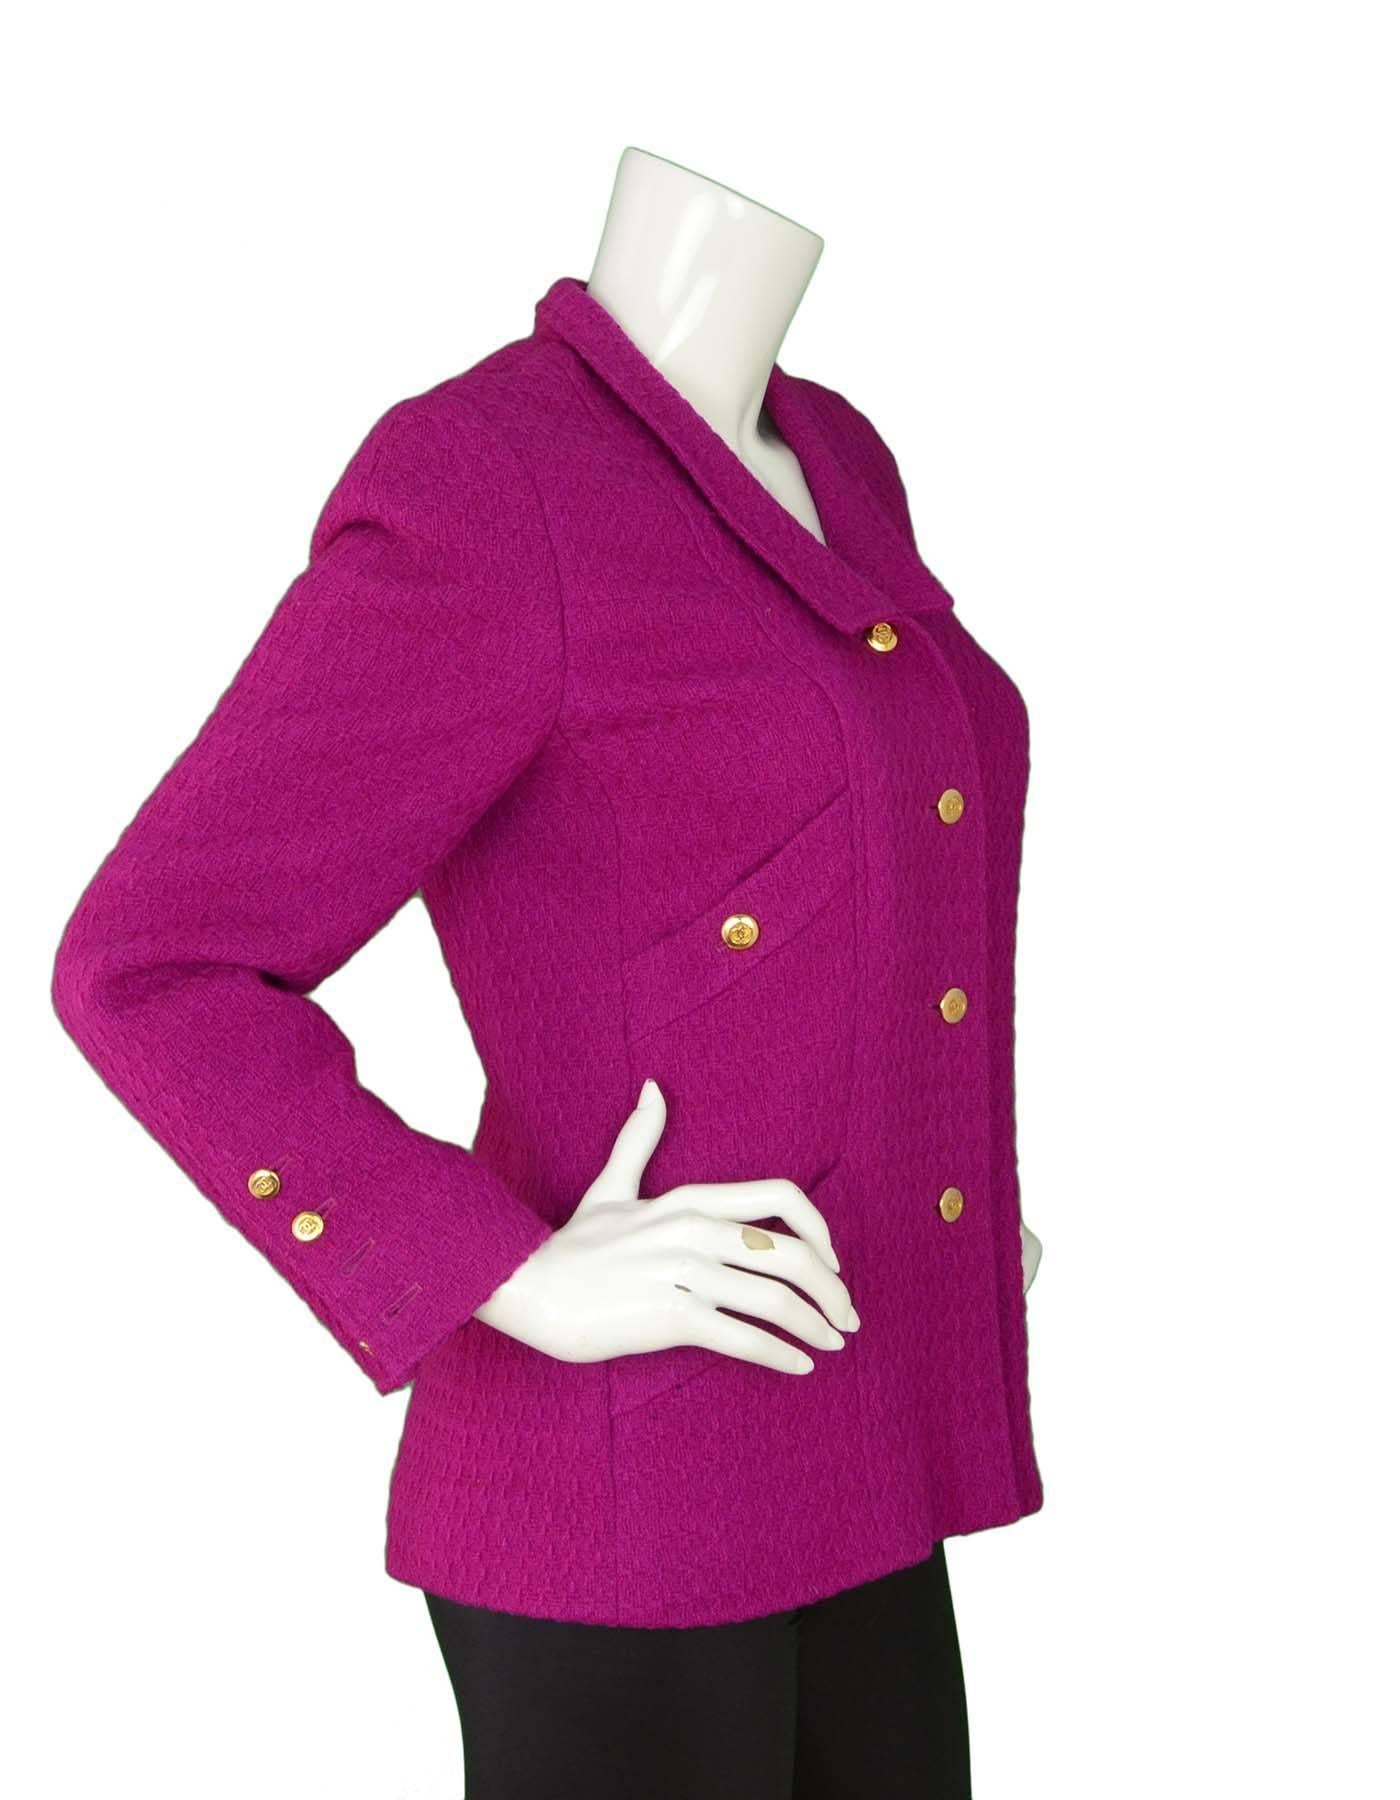 Chanel Fuchsia Wool Jacket
Color: Fuchsia
Composition: Believed to be a wool-blend
Lining: Fuchsia, Silk-blend
Closure/Opening: Button down front
Exterior Pockets: Two breast pockets and two hip pockets
Interior Pockets: None
Overall